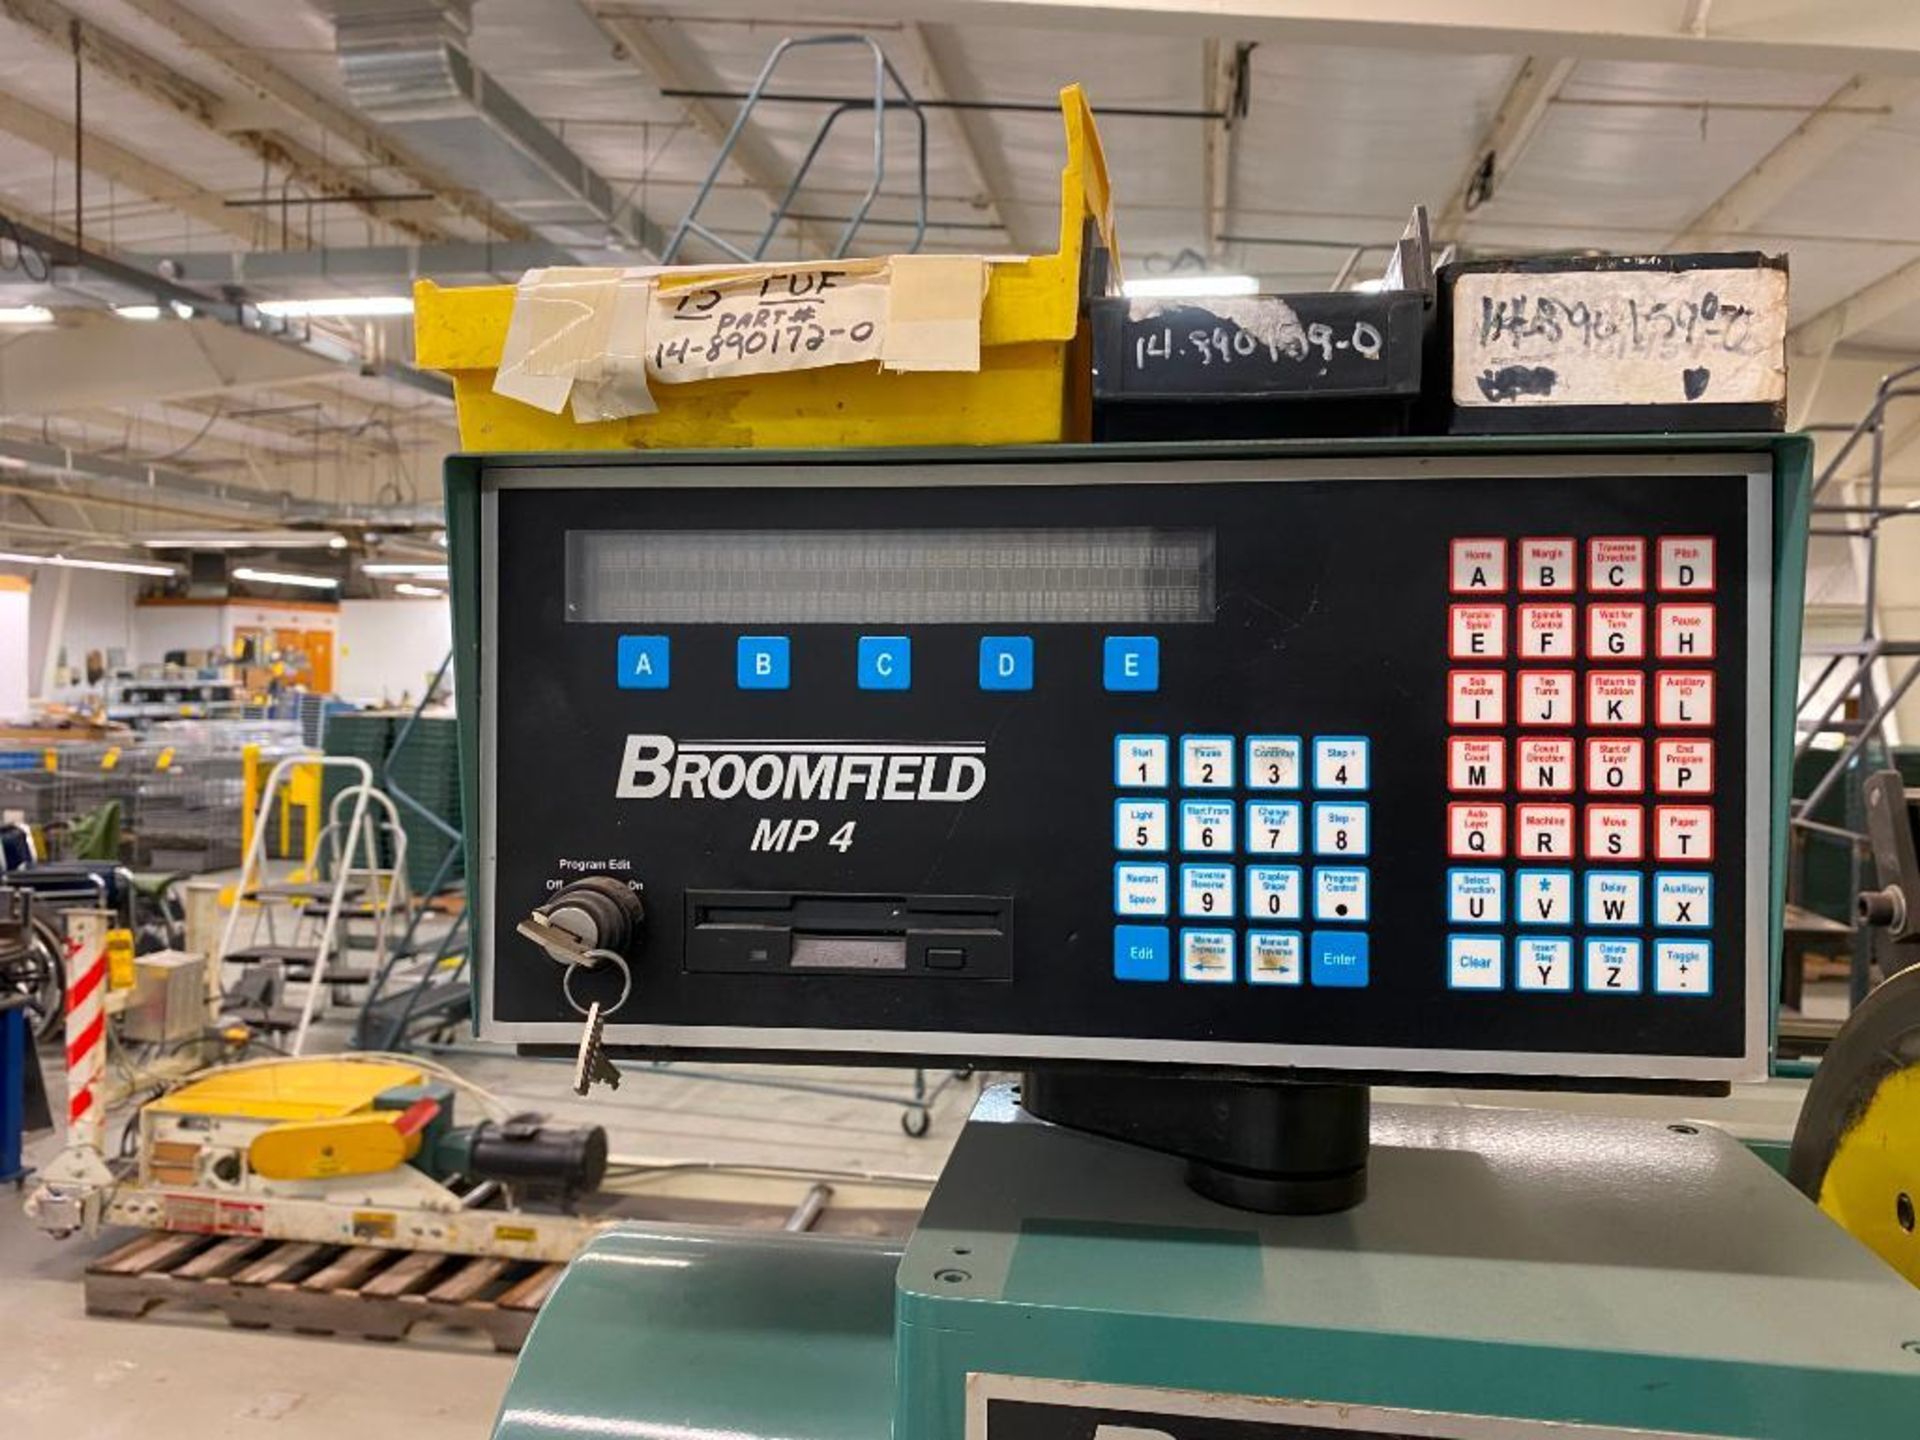 Broomfield Transformer 200 Coil Winding System, Broomfield MP4 DRO - Image 9 of 11